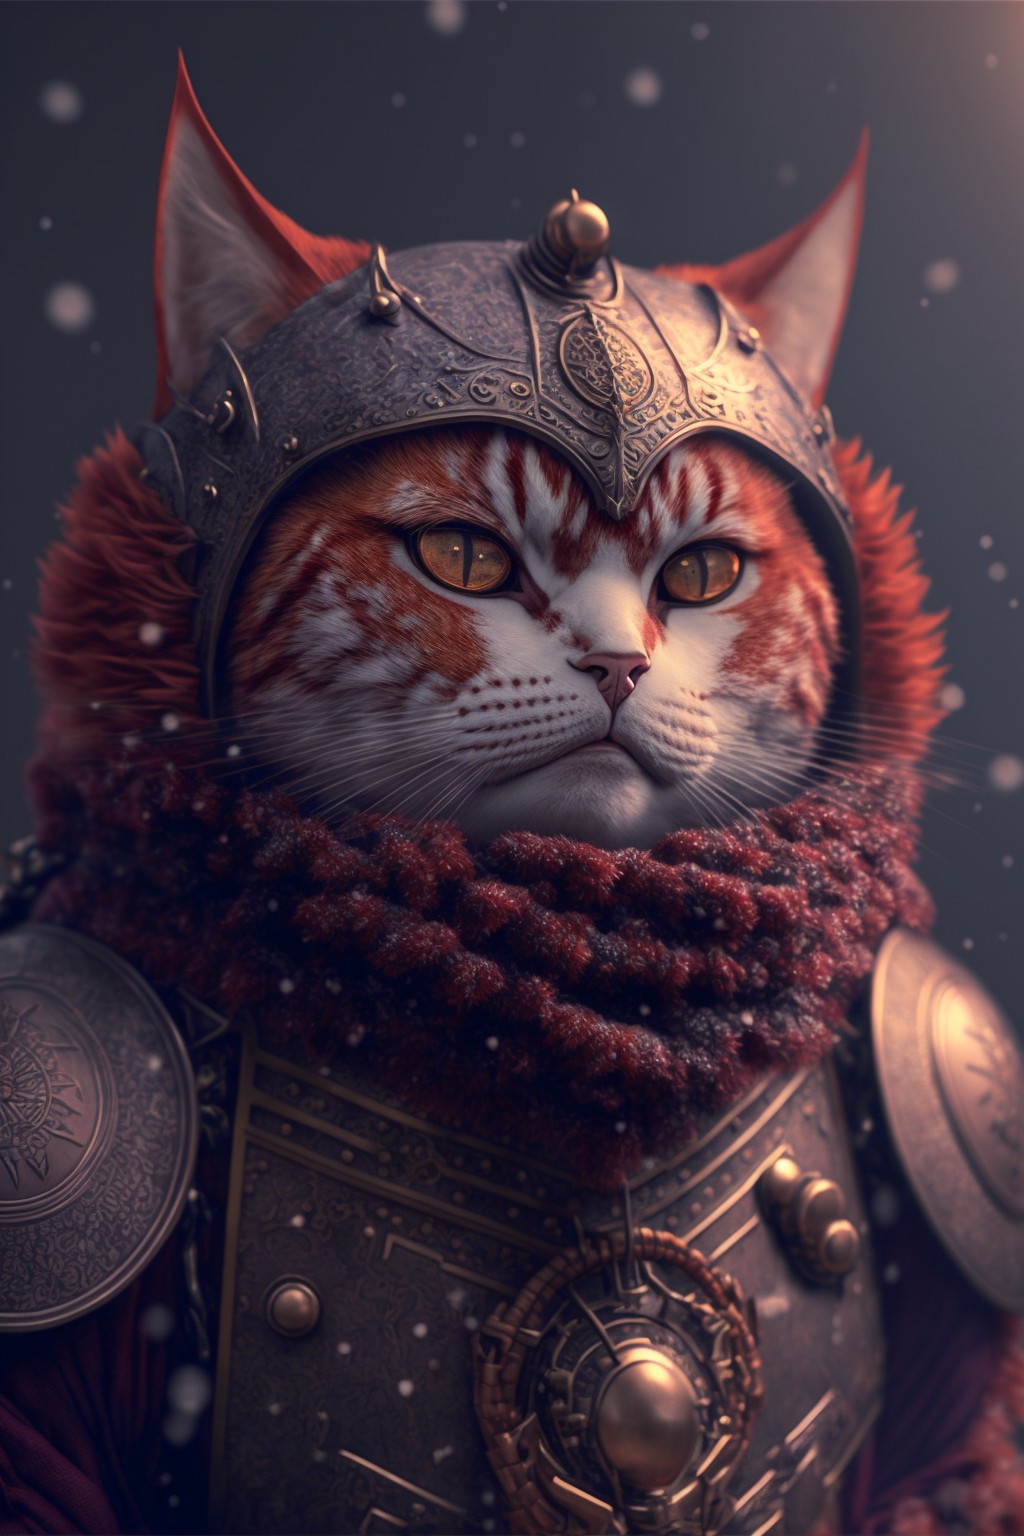 8 images of cat warrior in armor by Midjourney